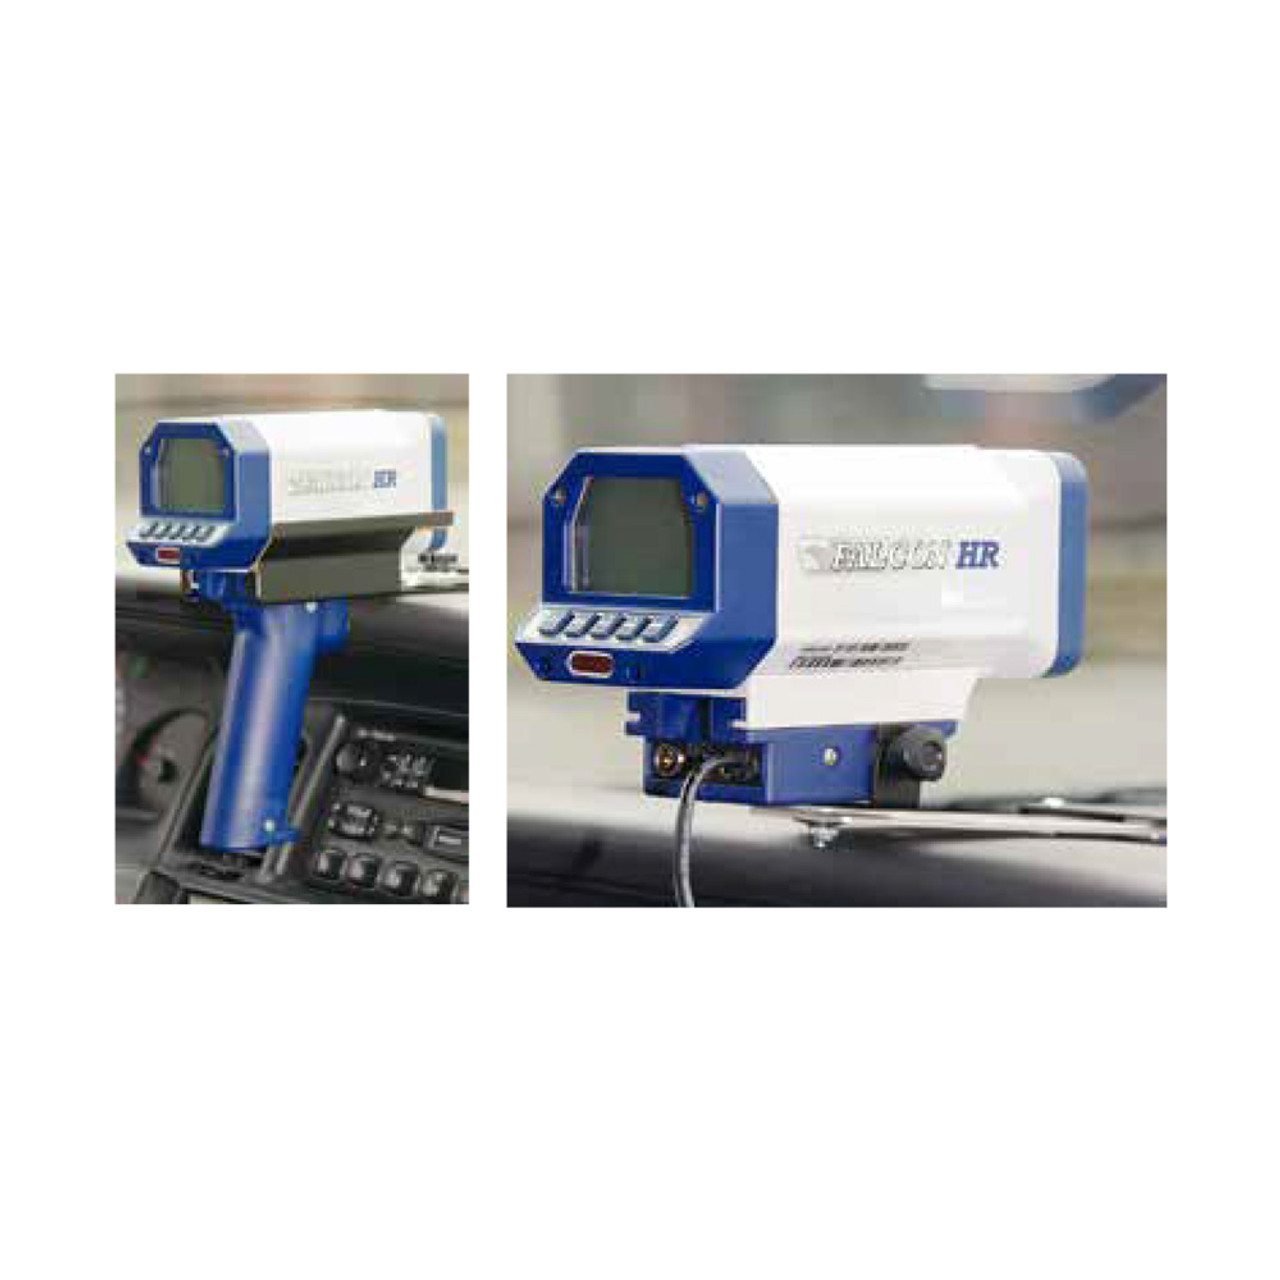 Kustom Signals Accessory,  Battery Handle w/ RS232 data port & Quick Charger 12VDC for Talon II or Falcon HR Radar